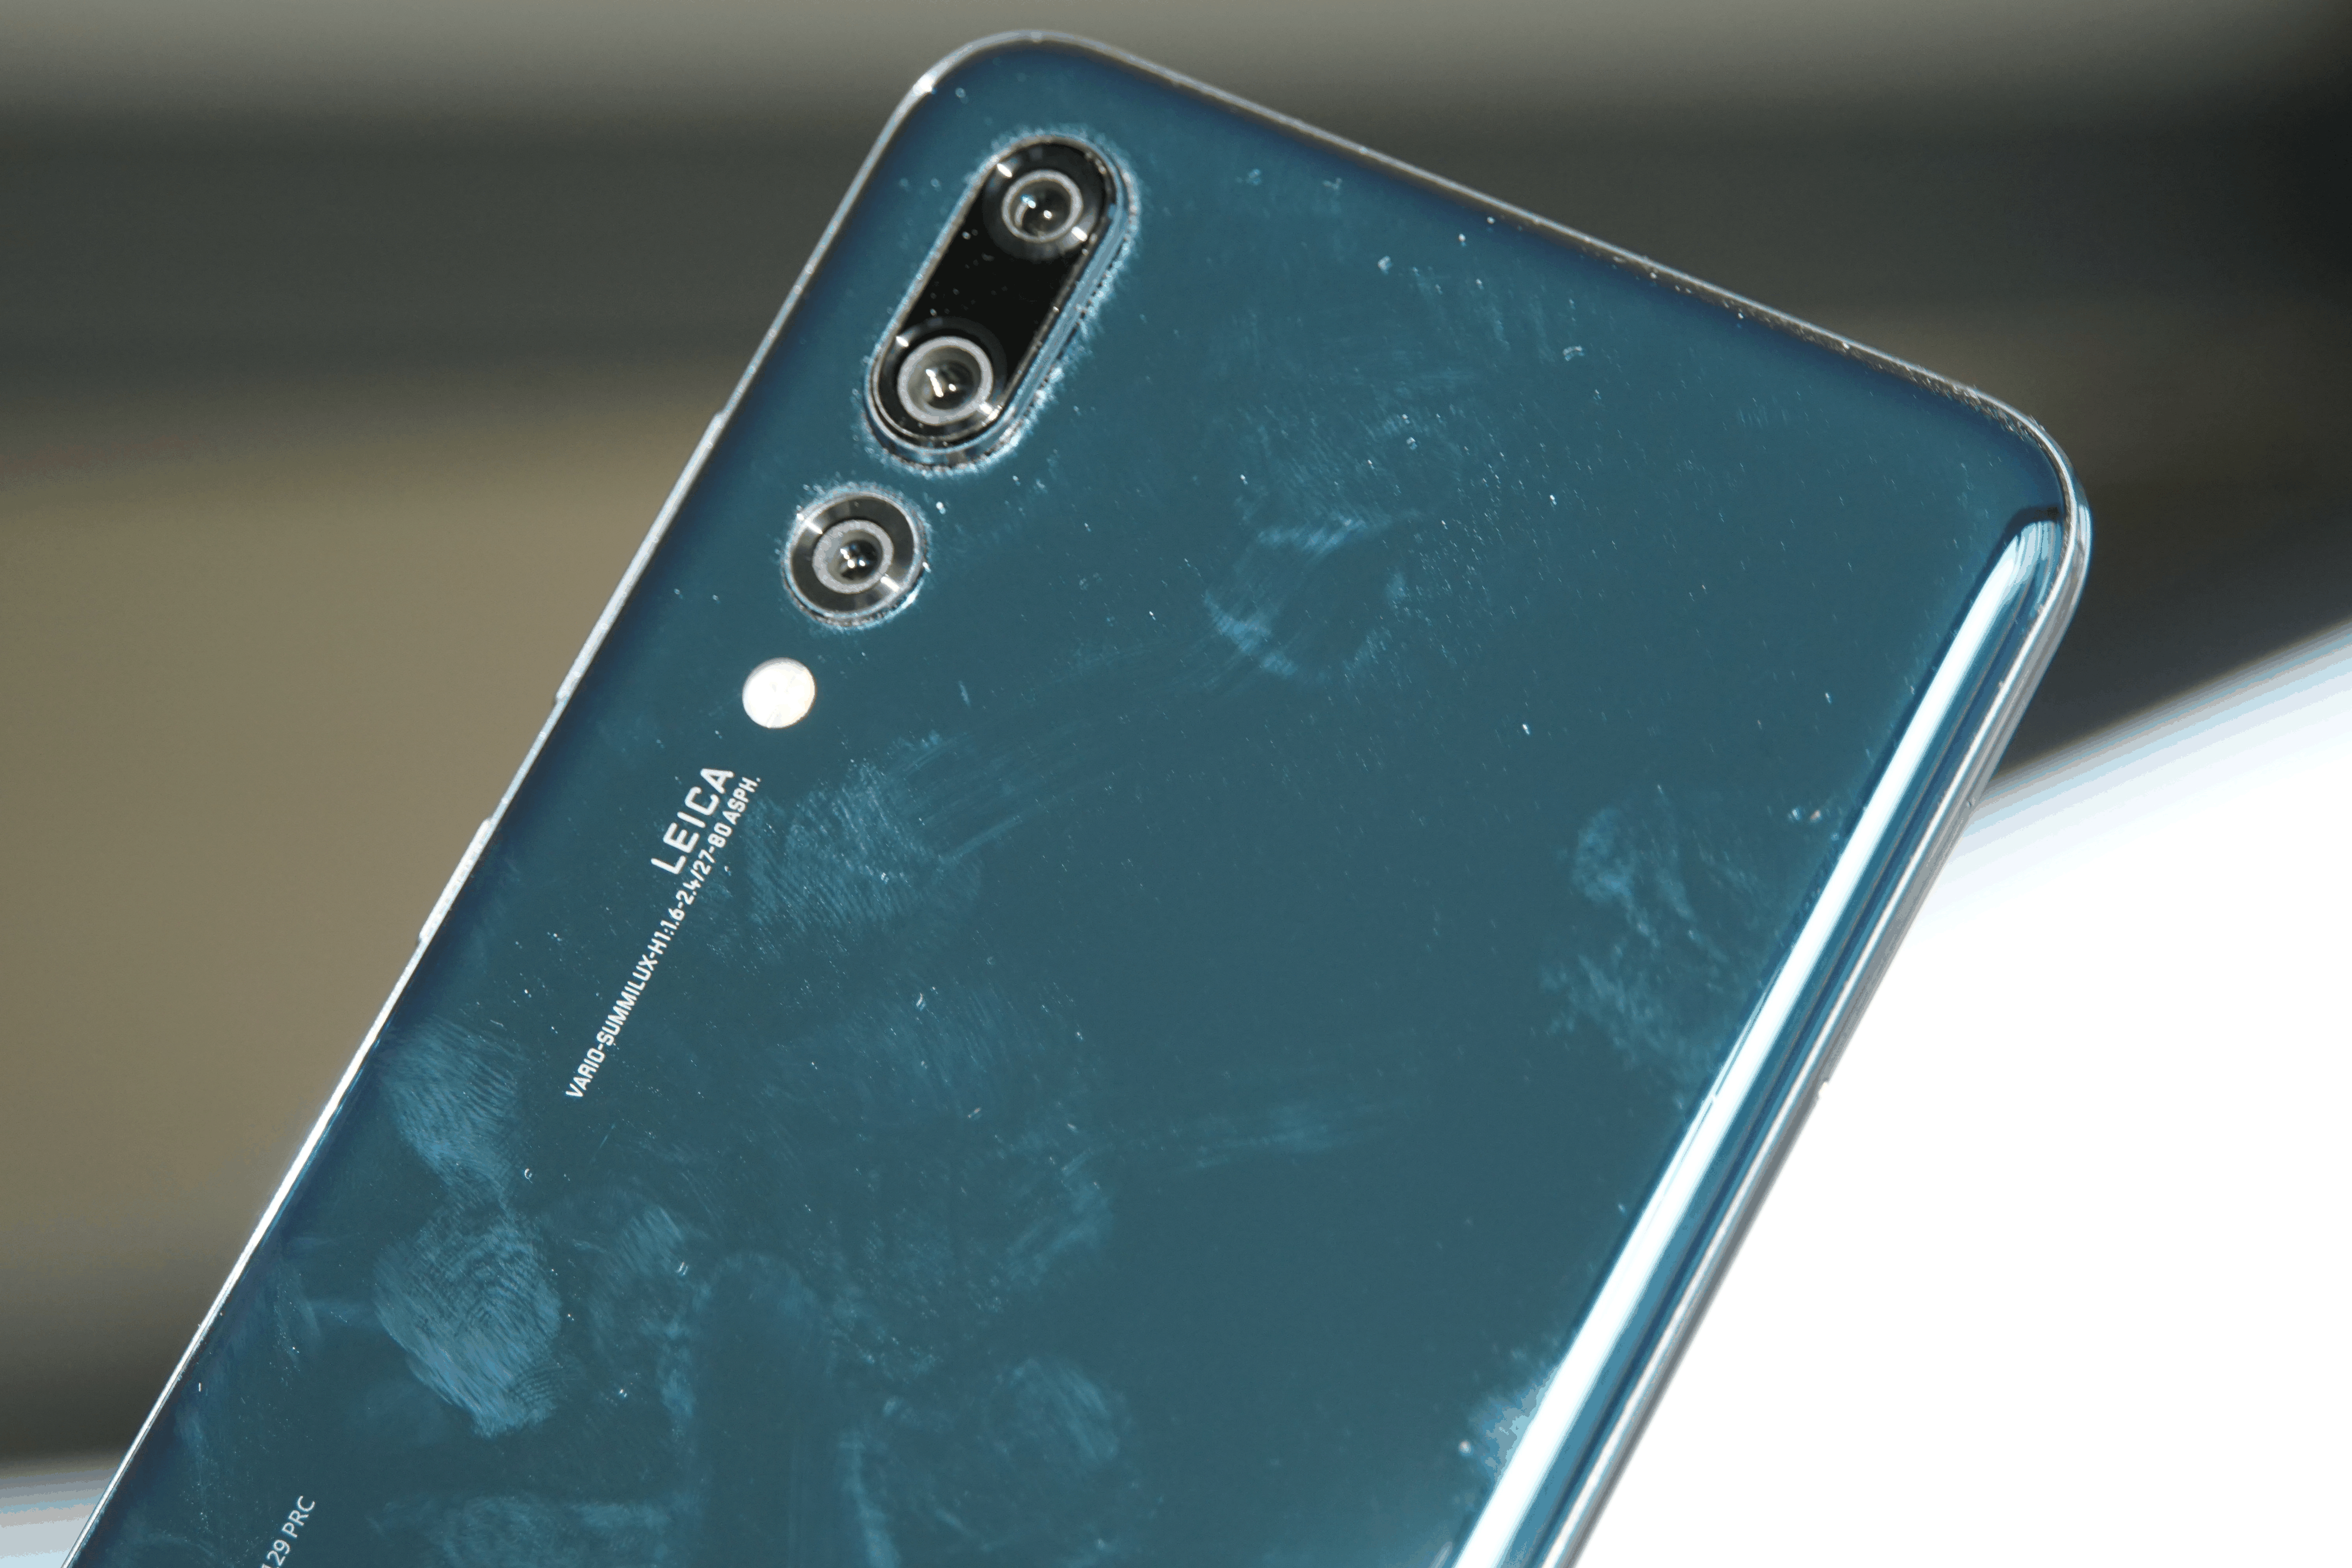 Huawei P20 Pro Android Smartphone Handy